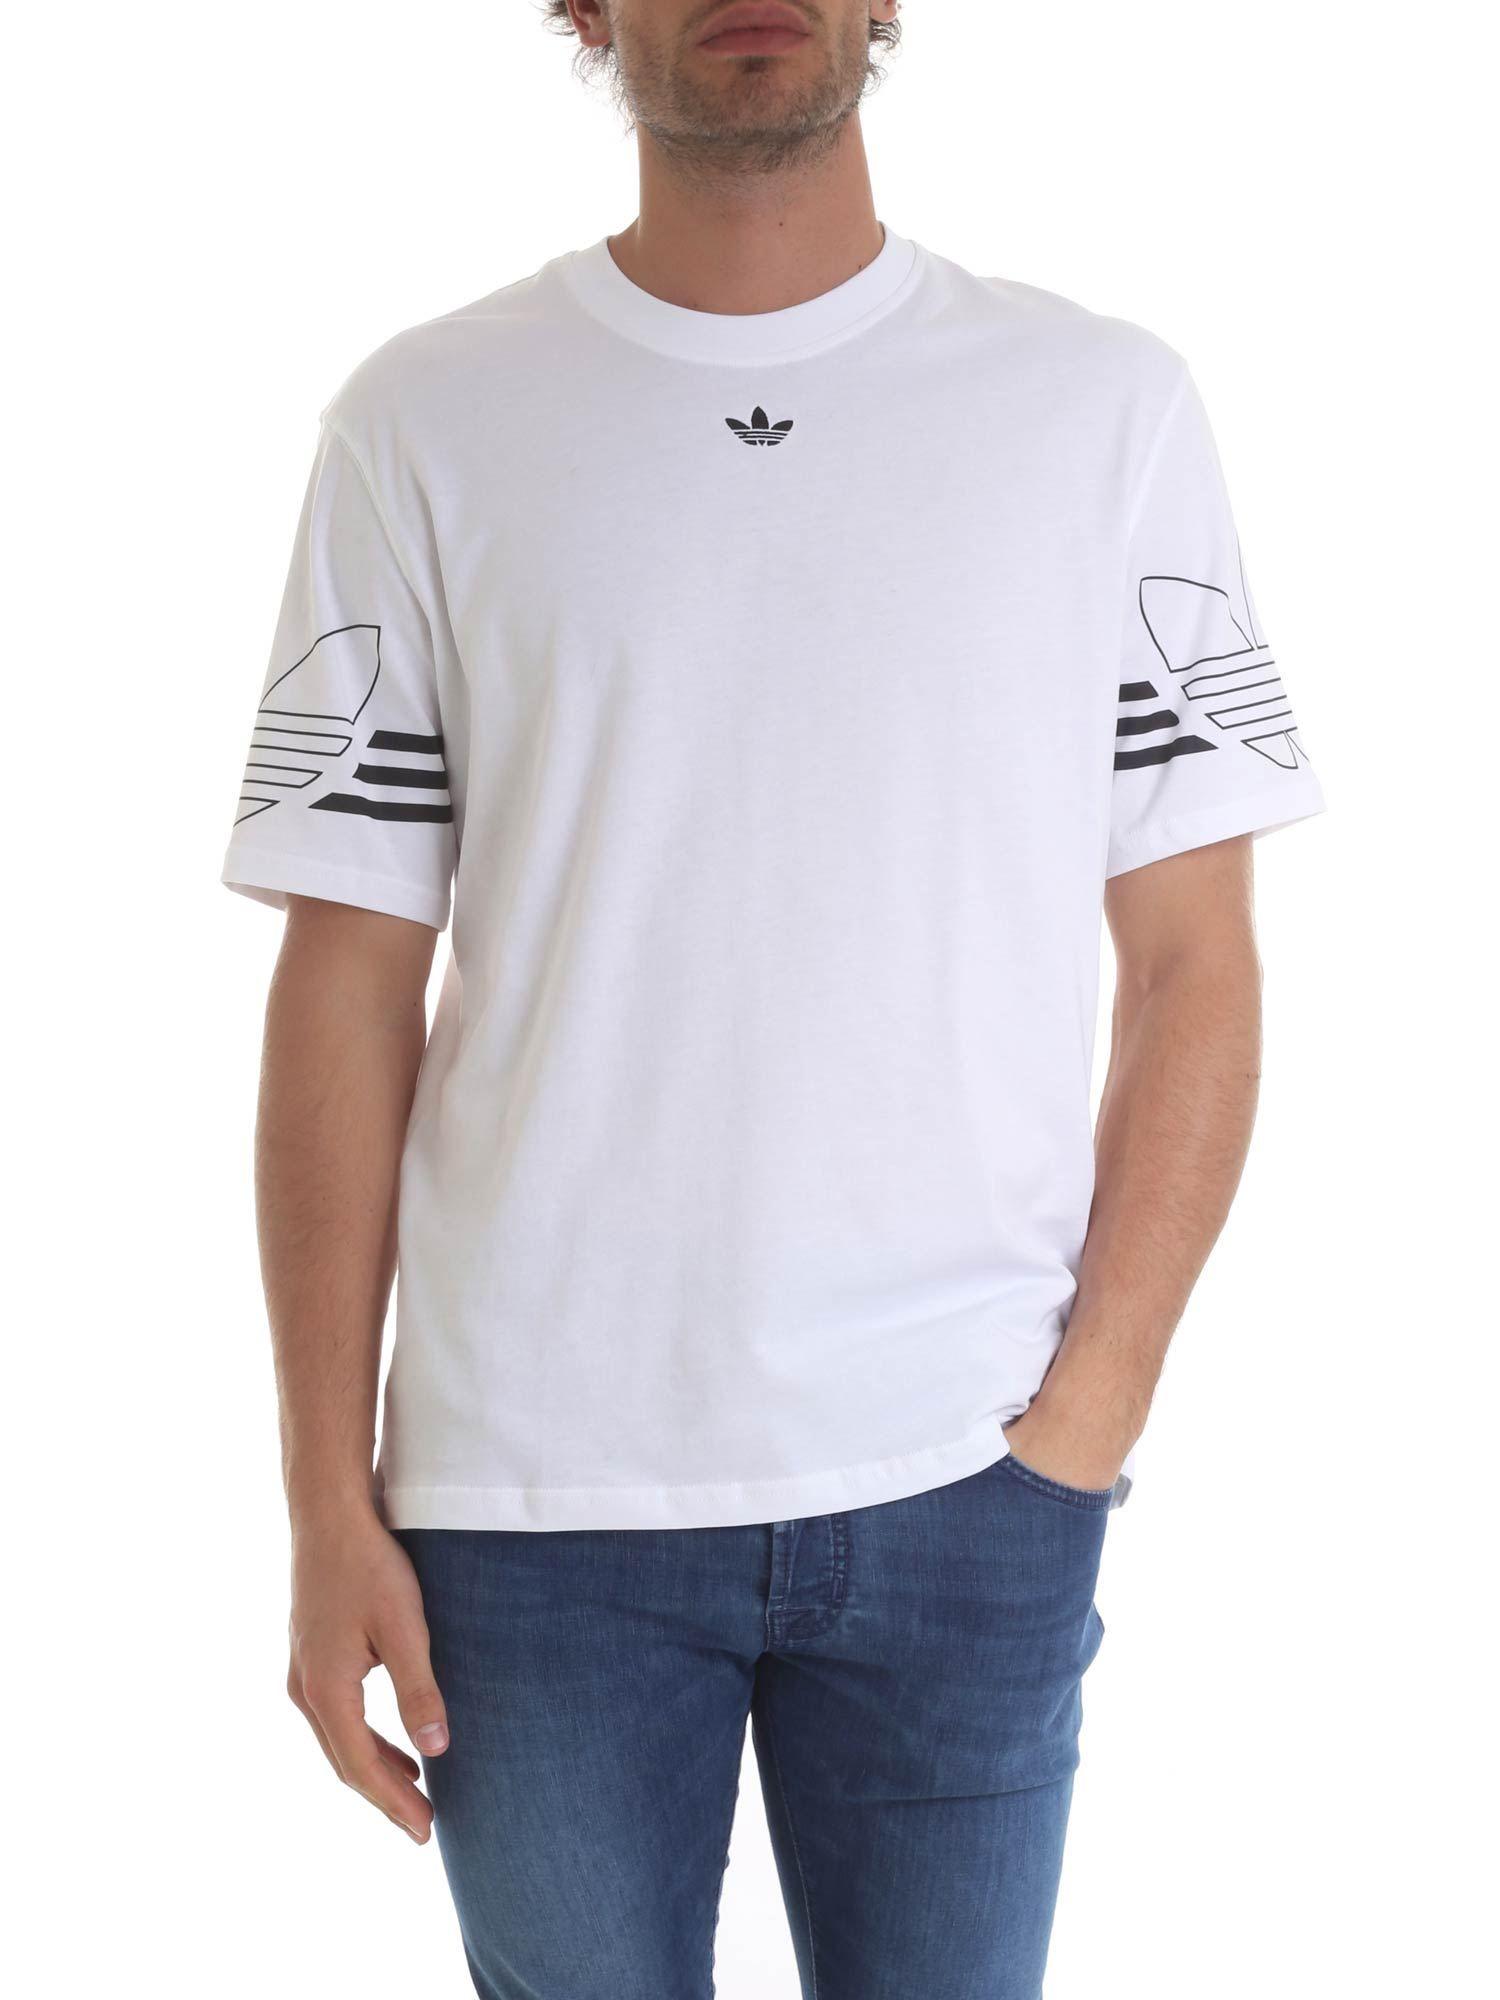 adidas White Cotton T-shirt in White for Men - Lyst